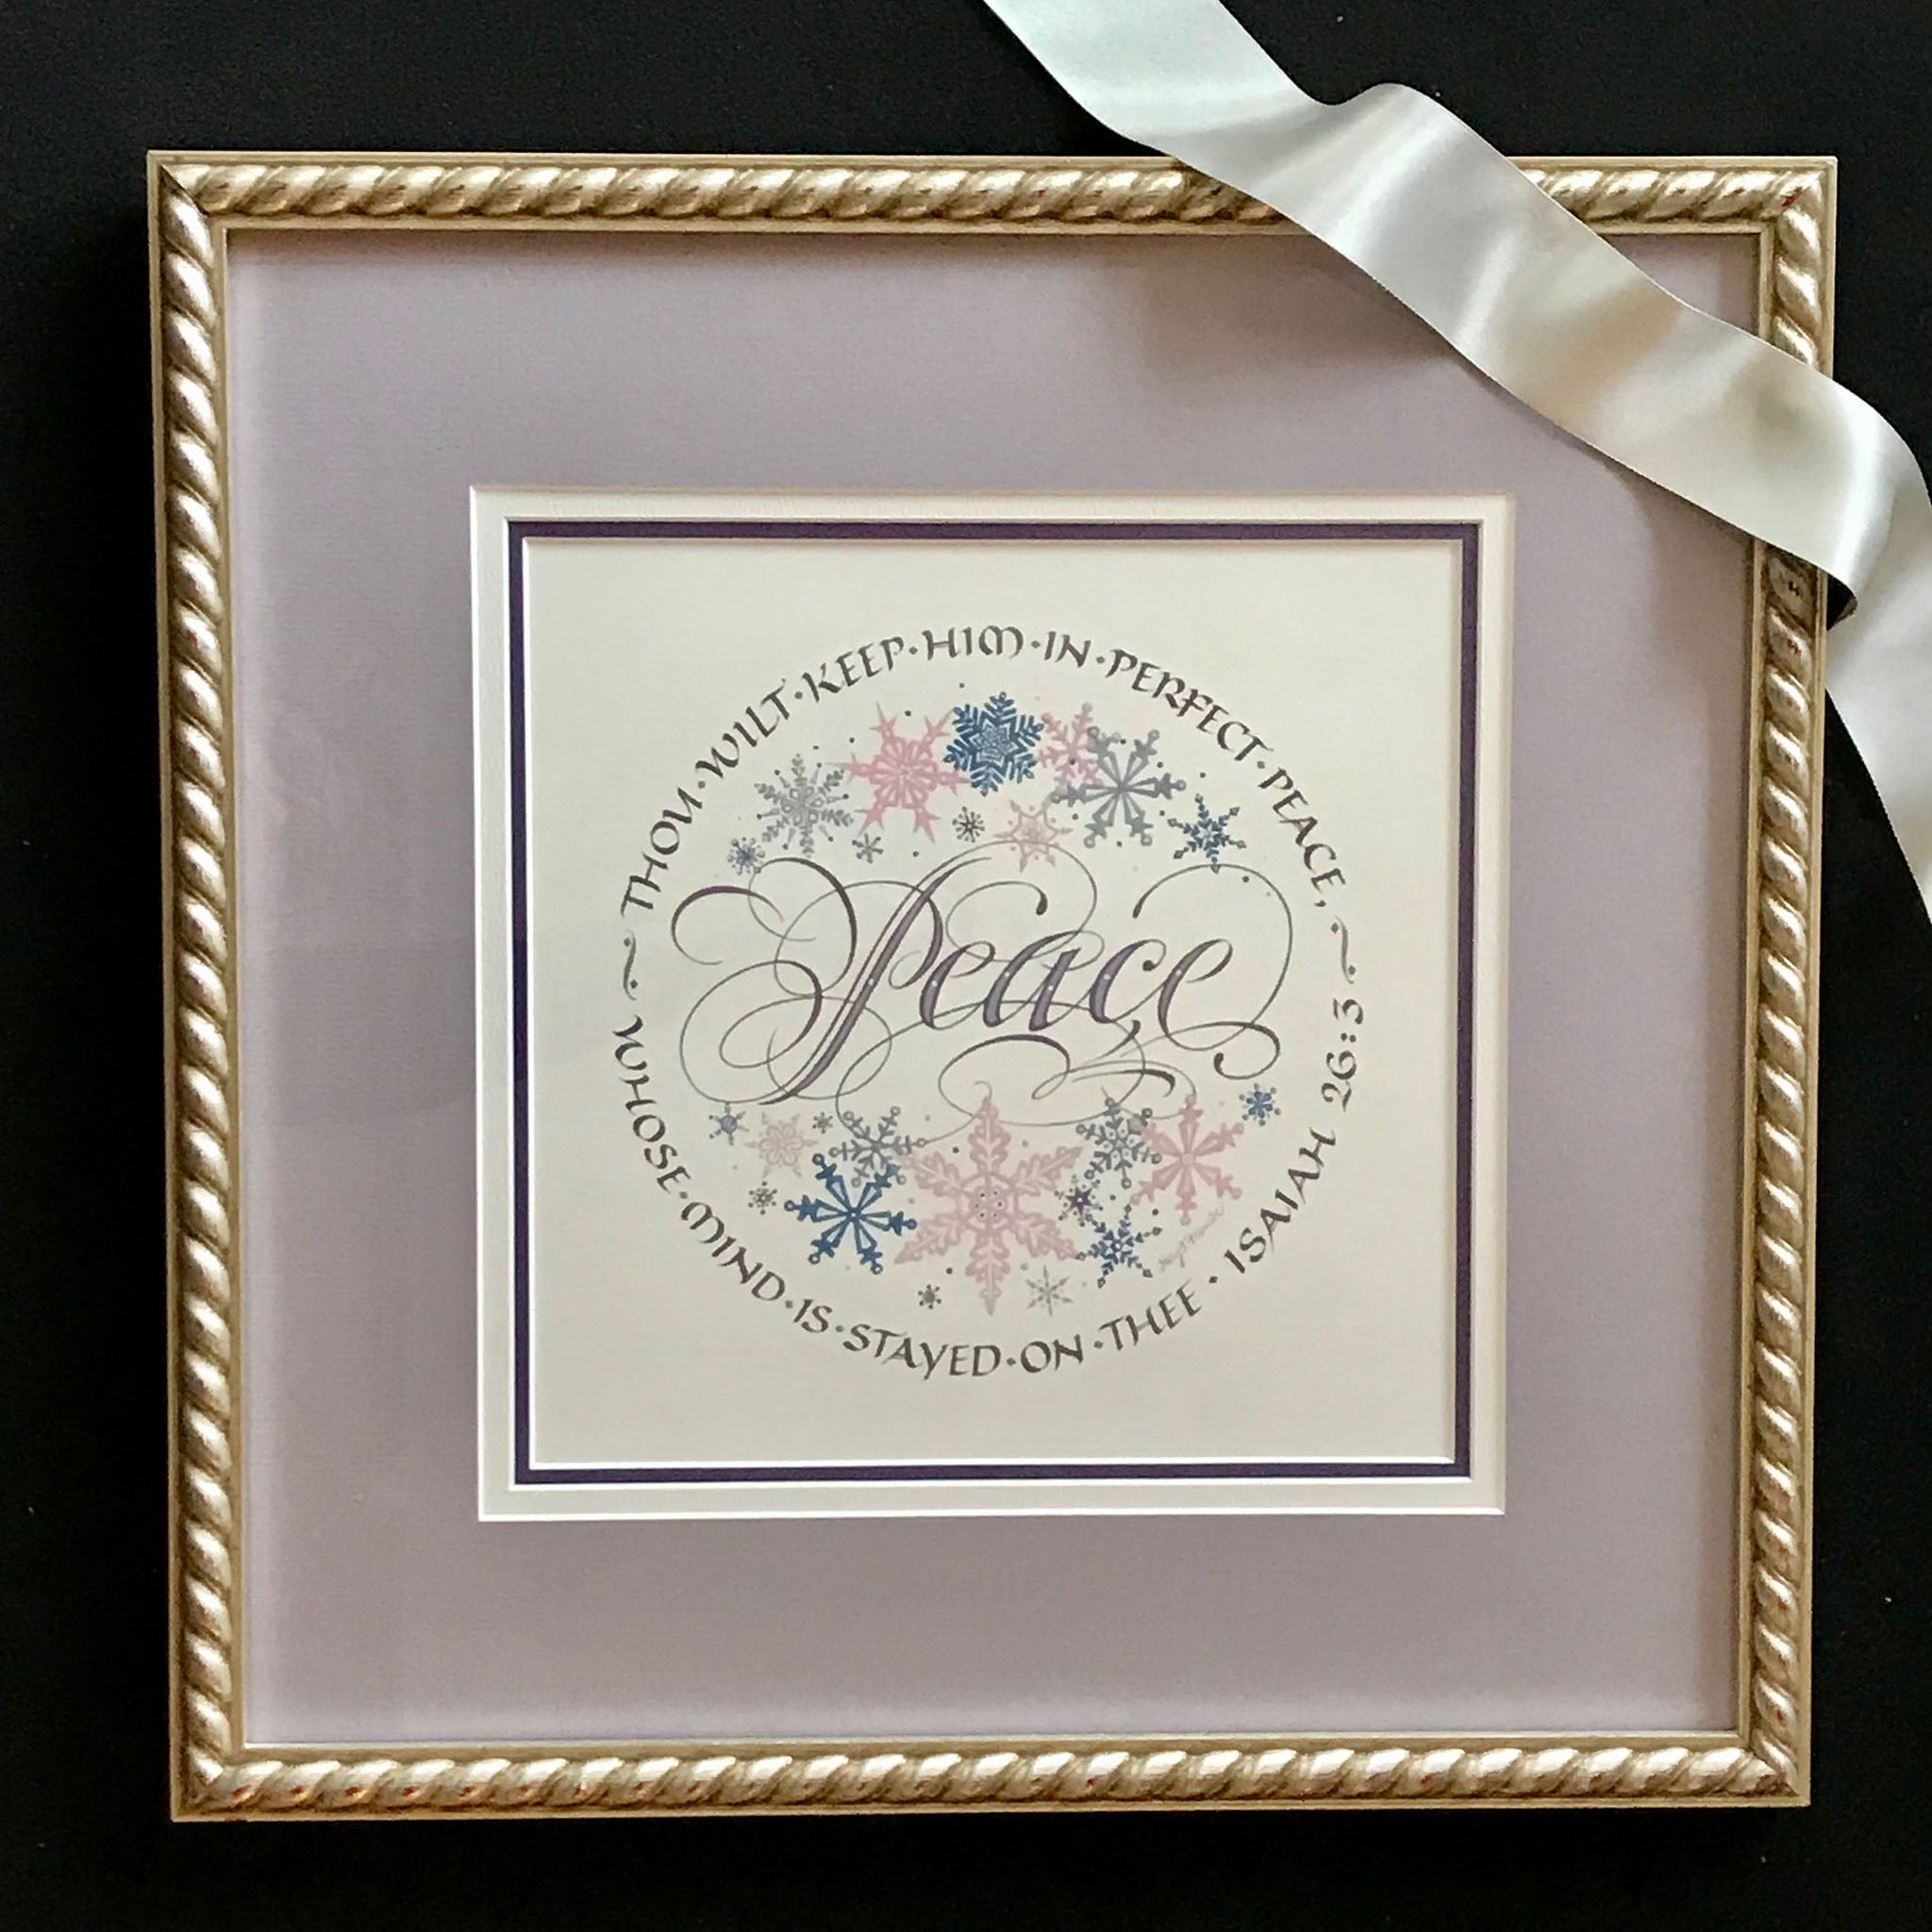 Peace Isaiah 26 3 Framed Original Calligraphy Print by Holly Monroe